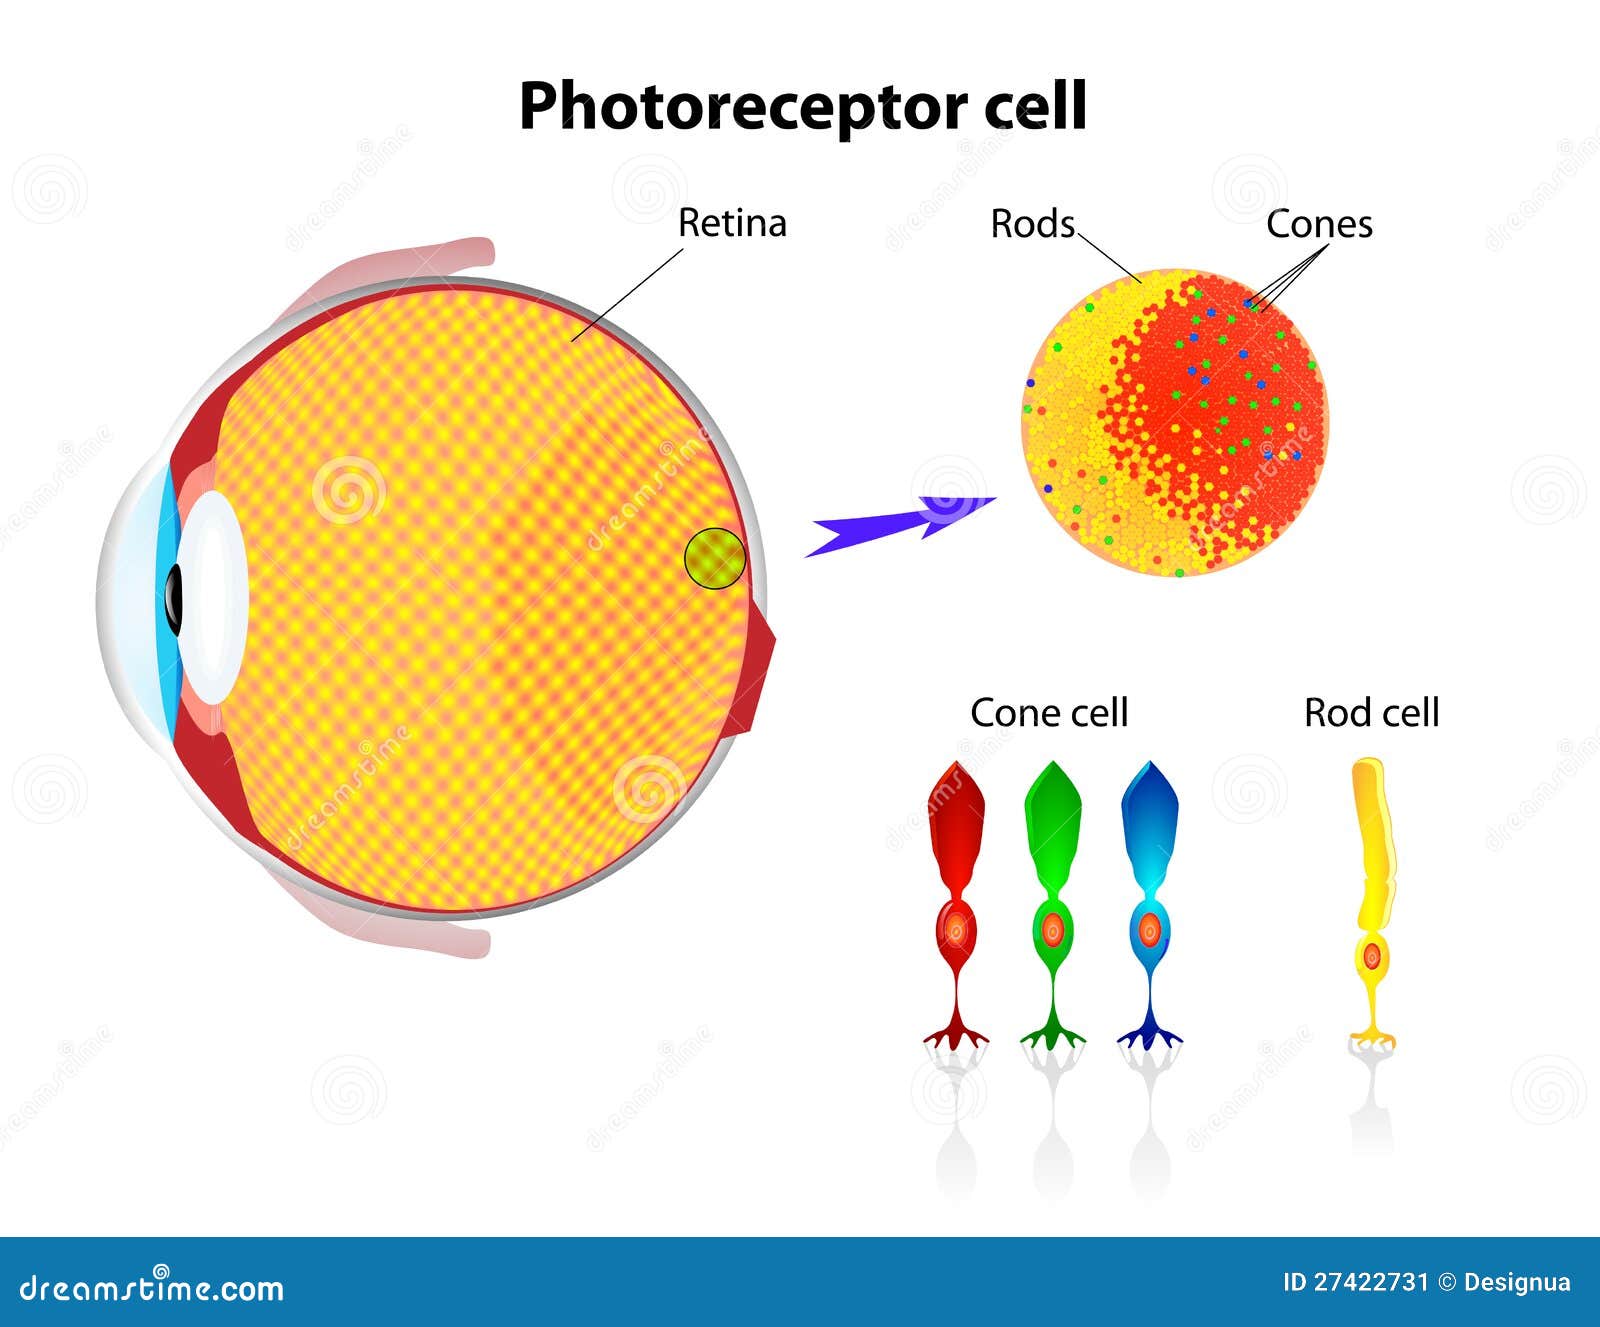 retina. rod cells and cone cells. 